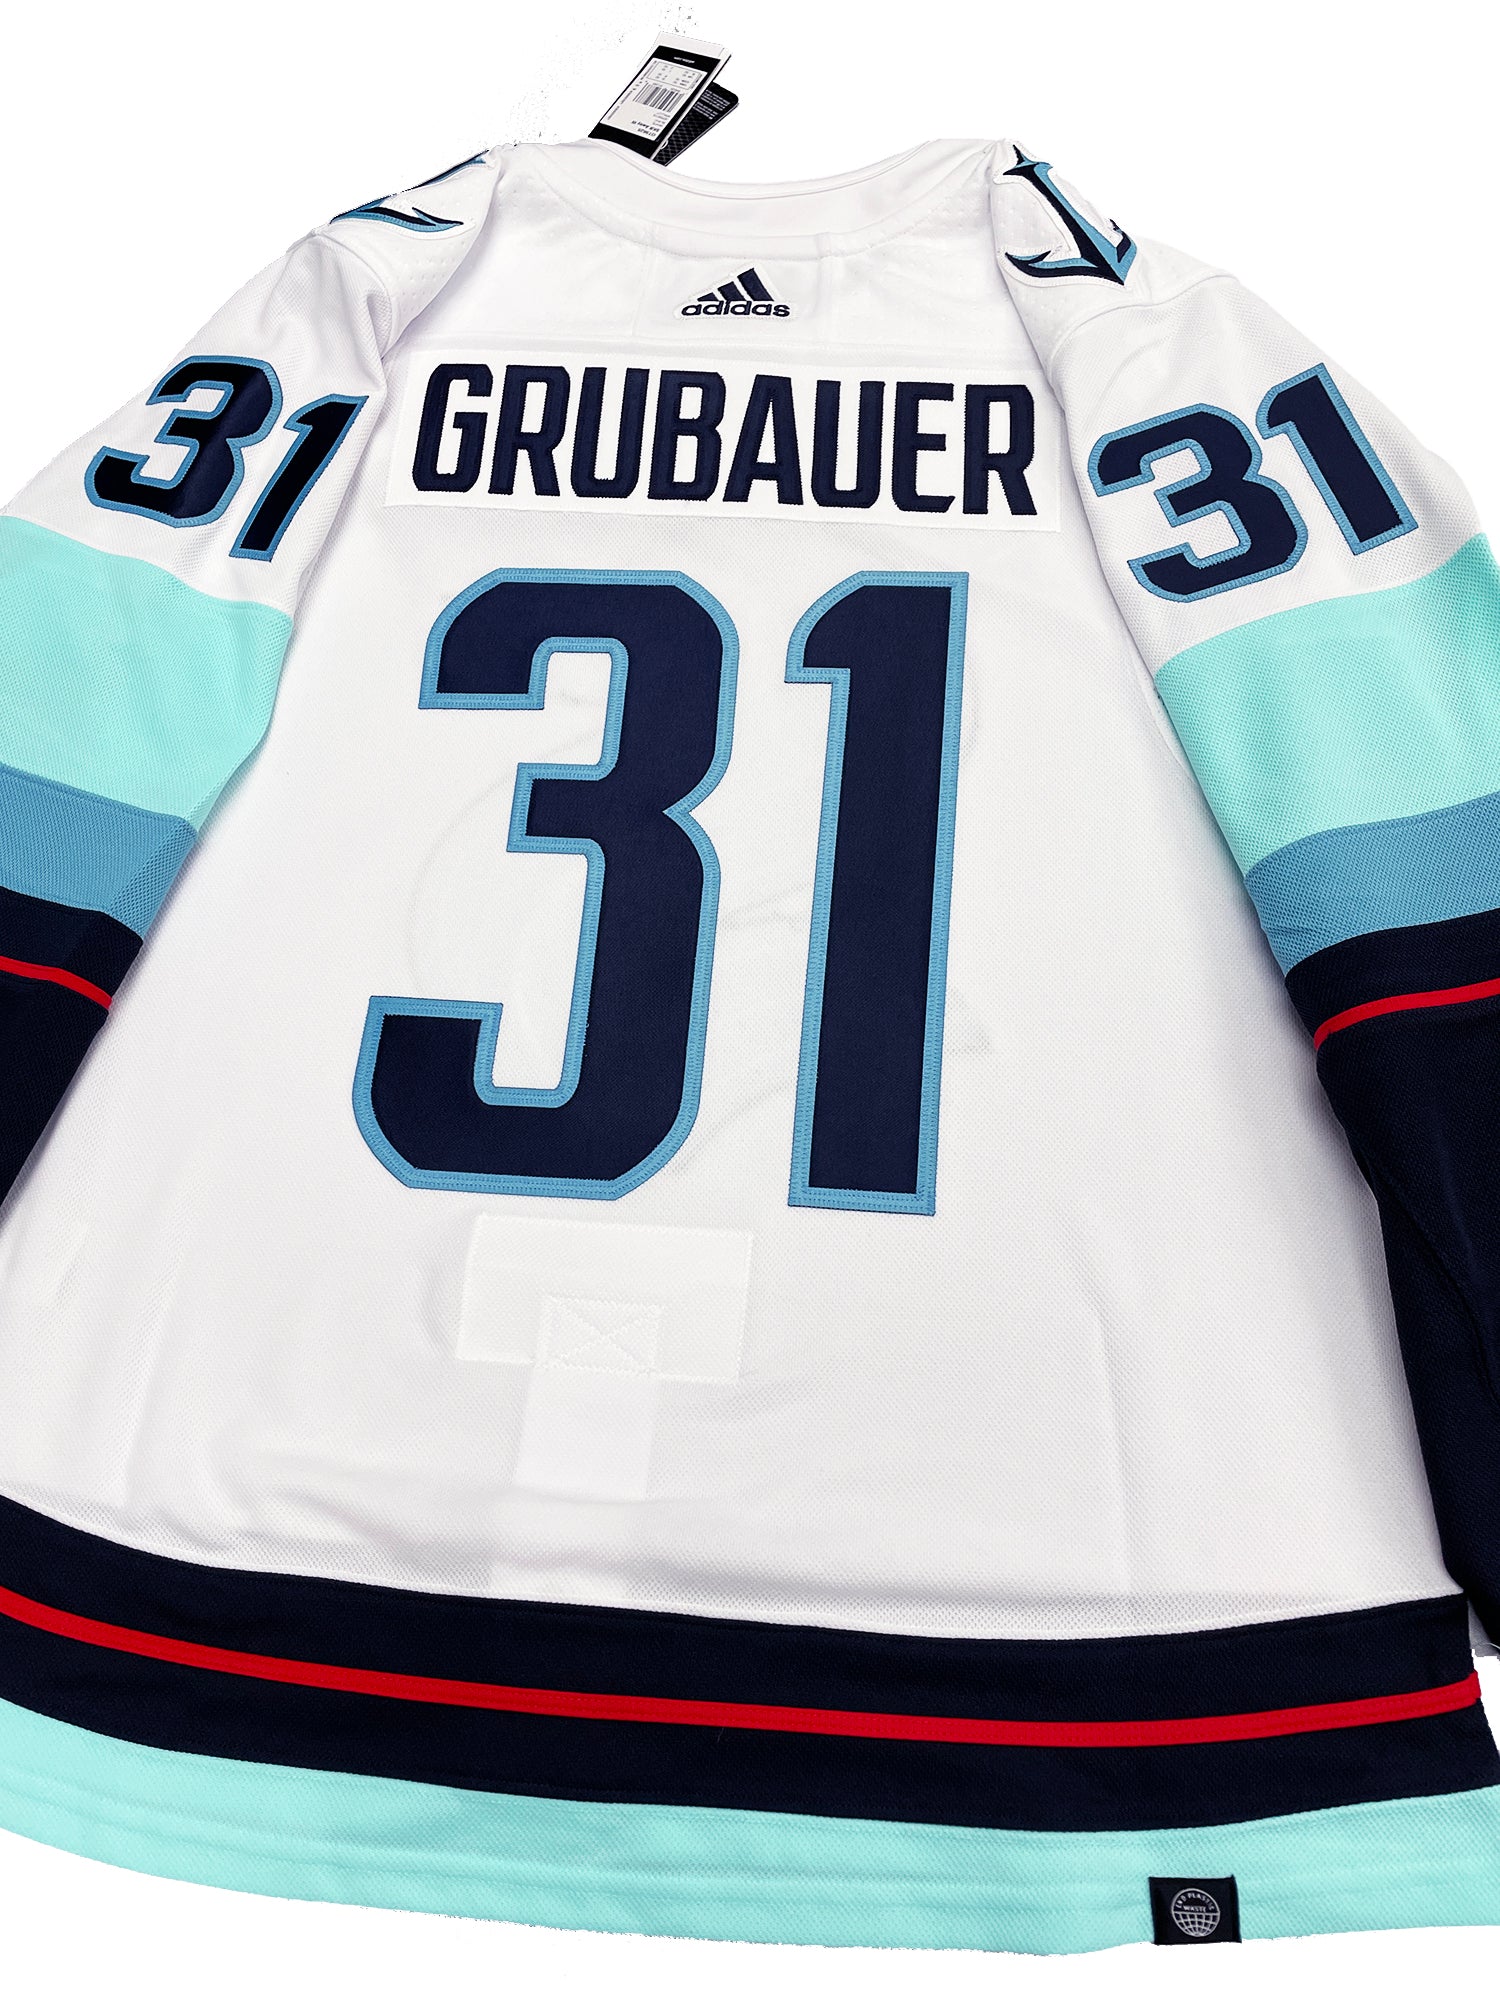 Kraken Hockey Jersey Customized With Your Name and Number 